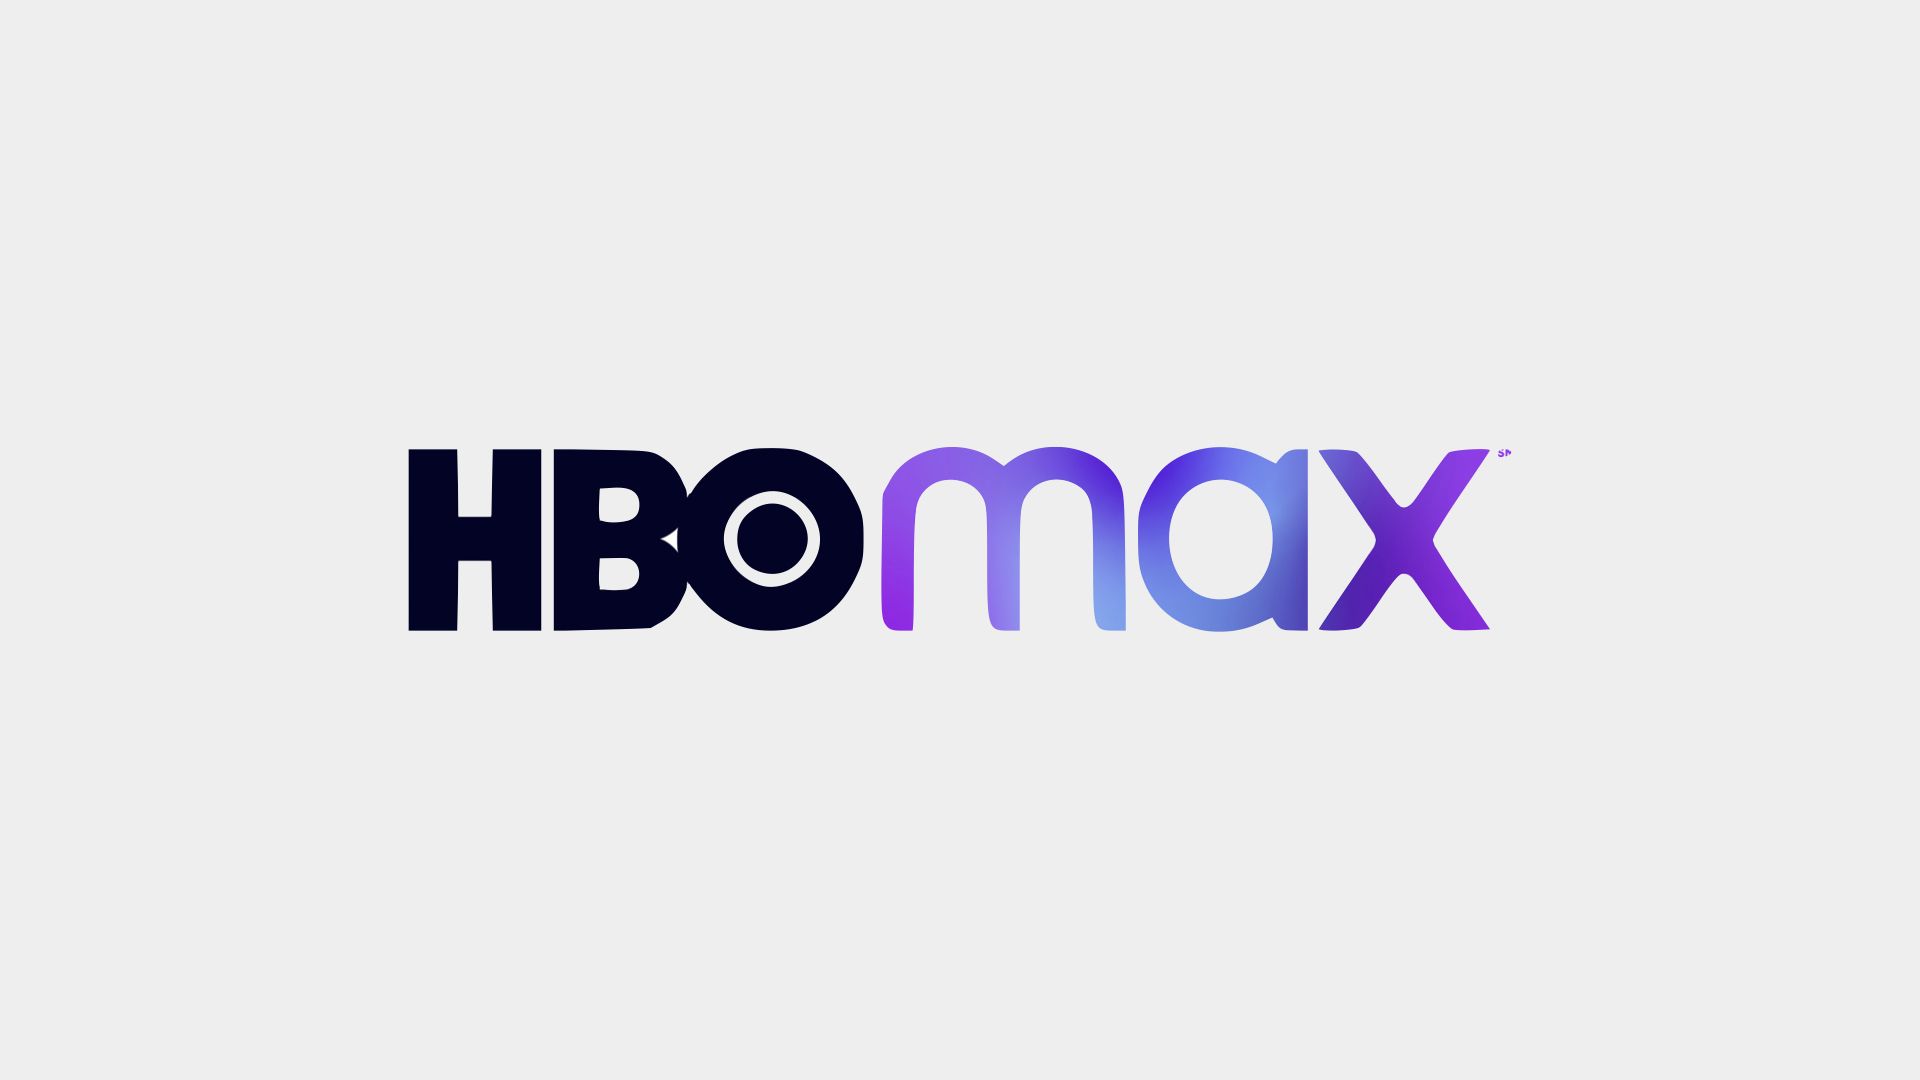 HBO Max Launches In May 2020 For $14.99 Month Park Joins